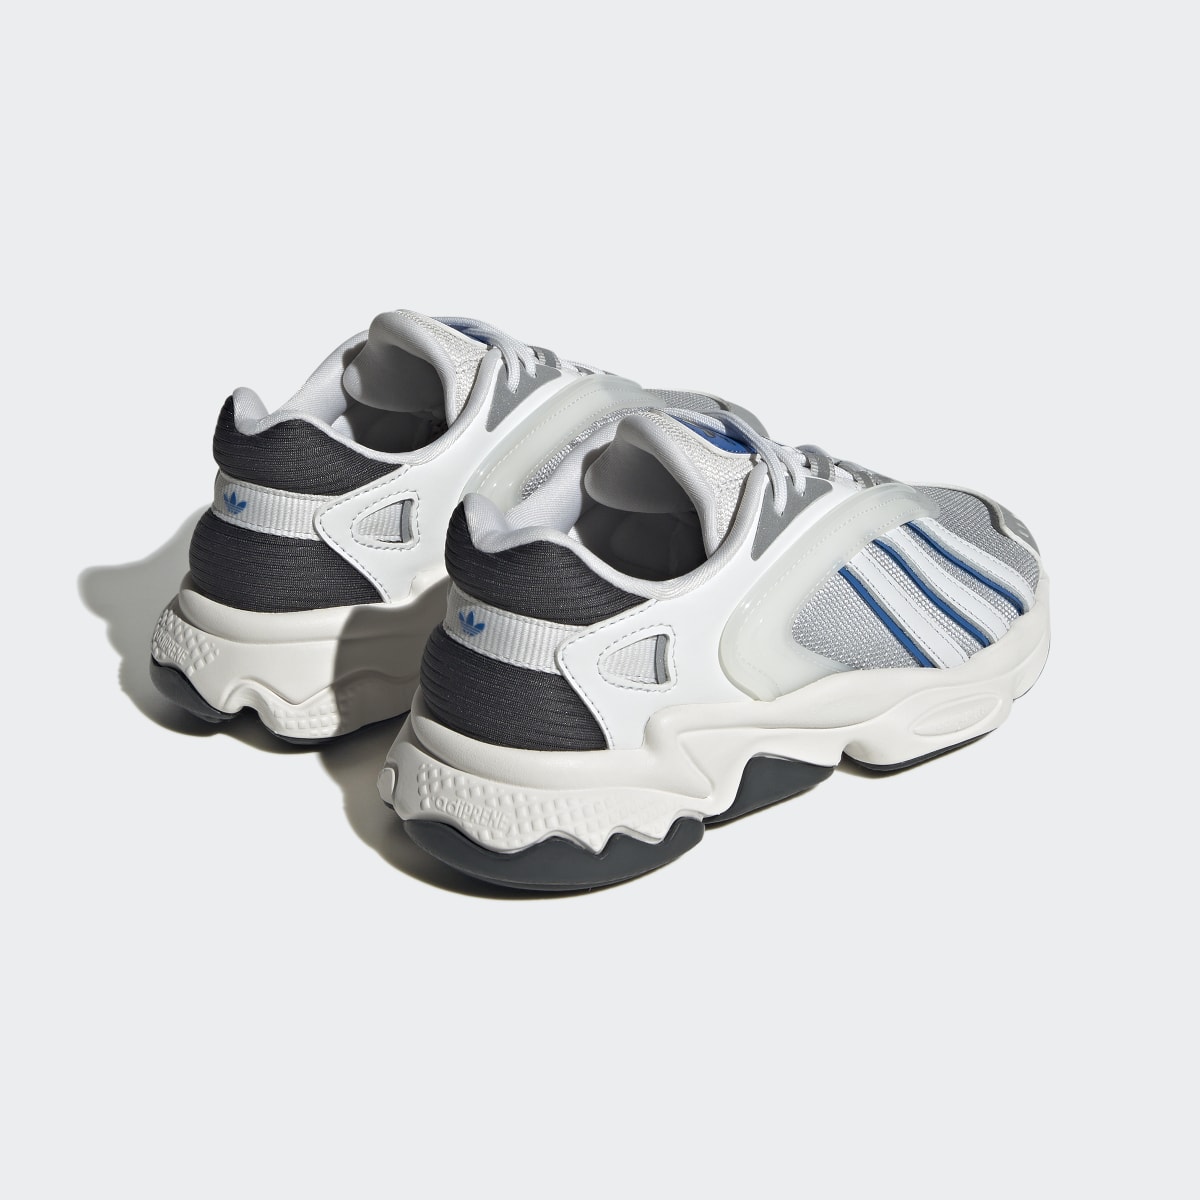 Adidas OZTRAL Shoes. 6